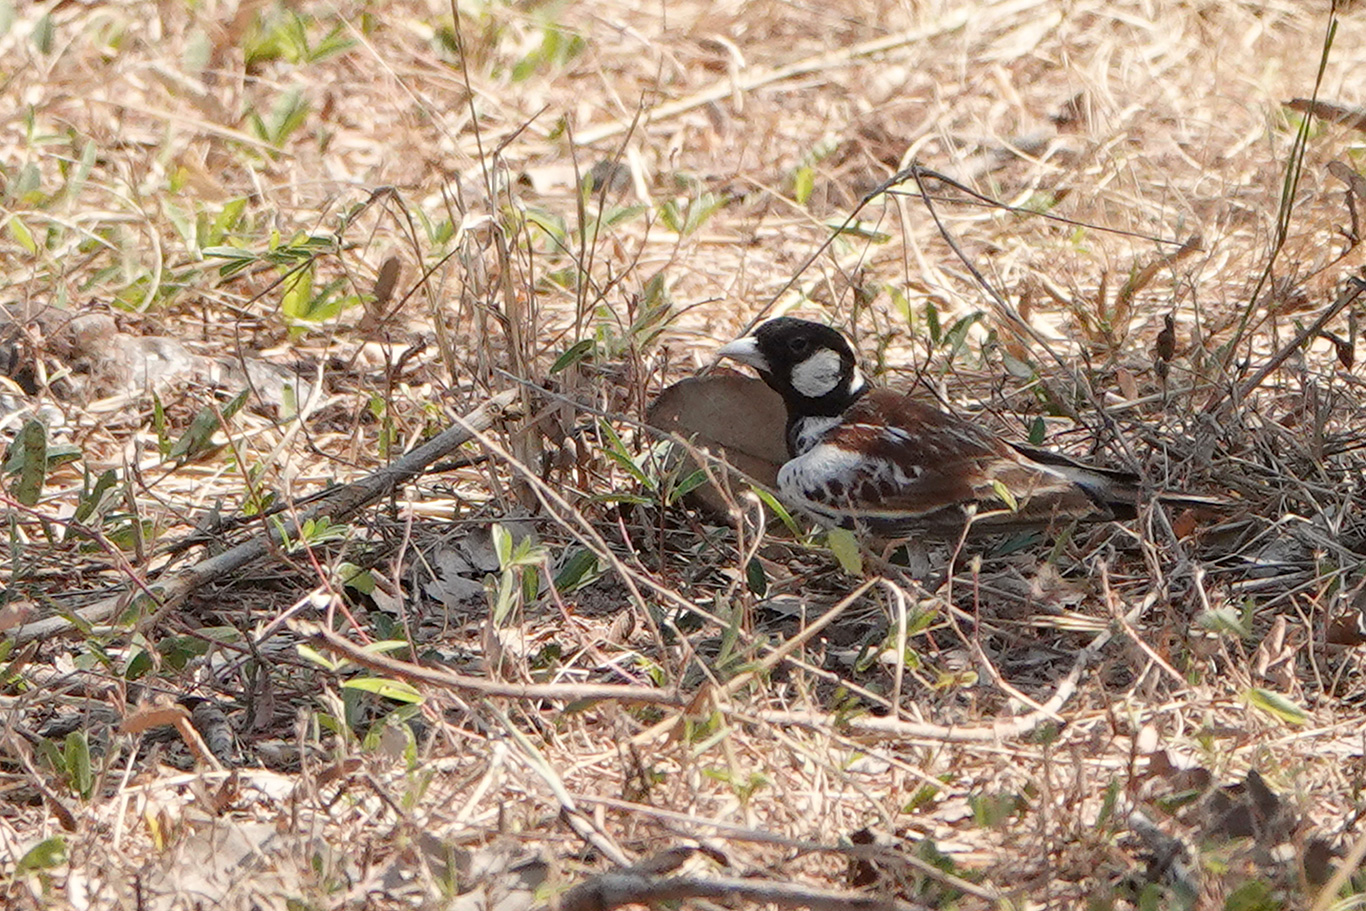 Chestnut-backed Sparrow Lark, South Bank Road, The Gambia.